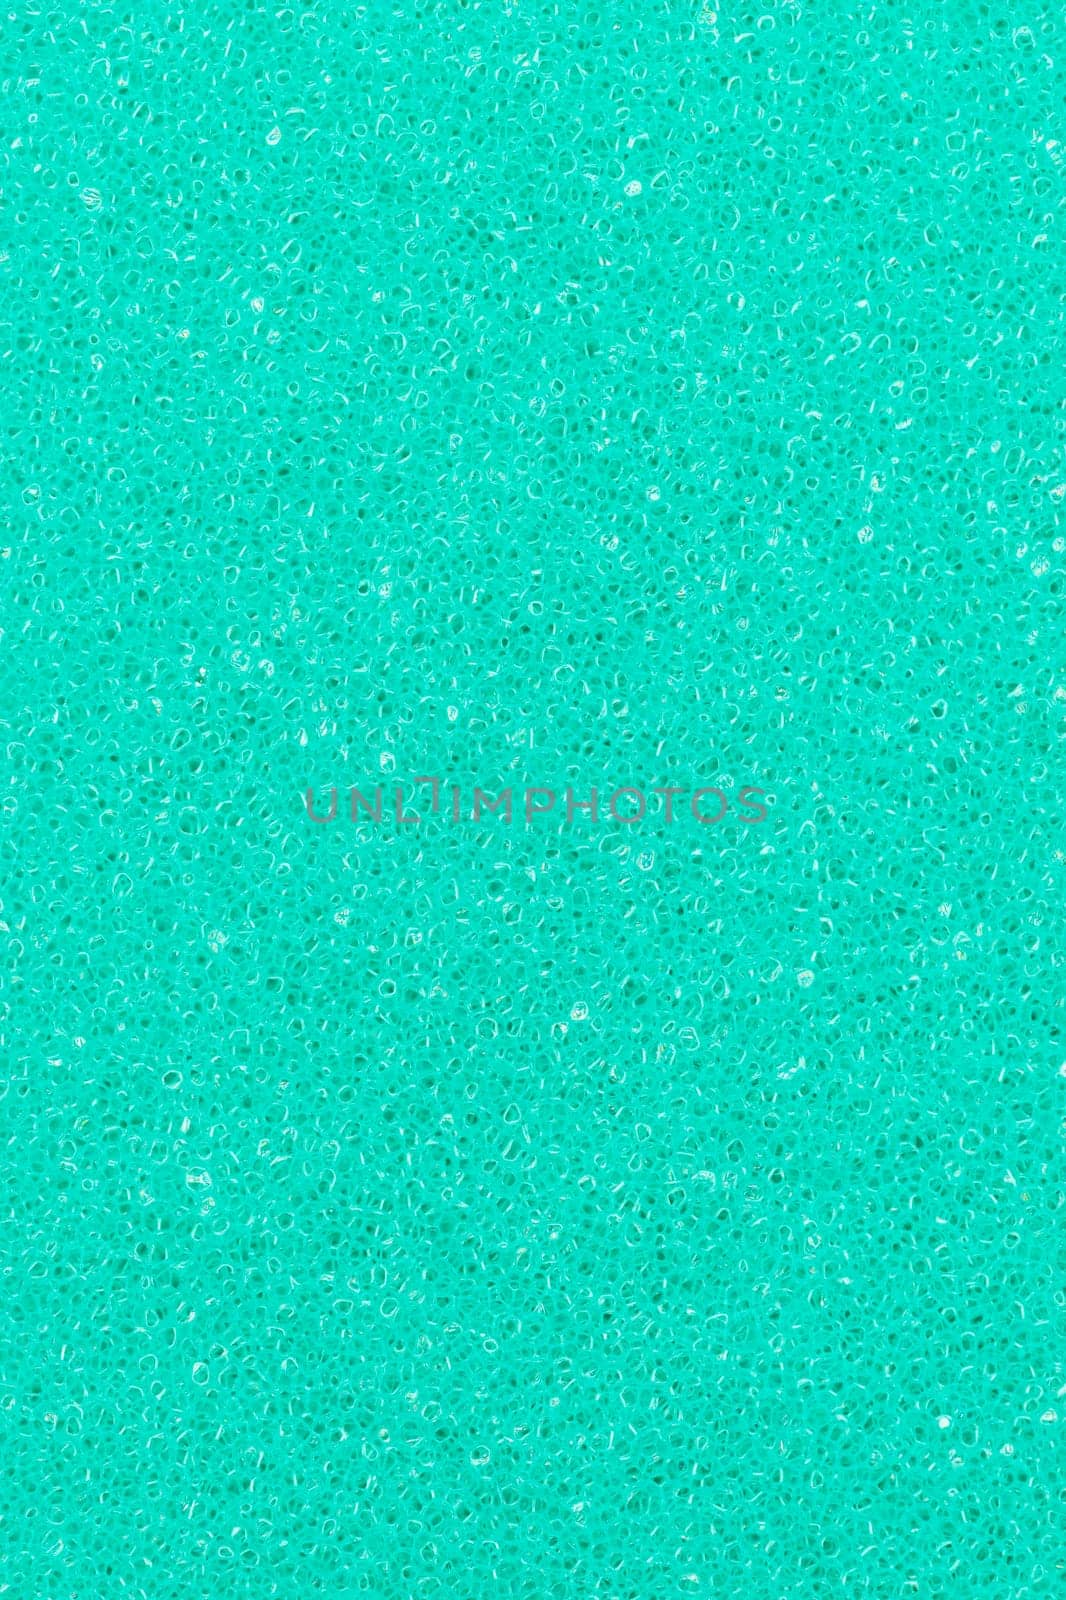 Turquoise color foam sponge porous abstract background. Extreme close-up view of detail synthetic textured material. Vertical composition for design, colored backdrop.